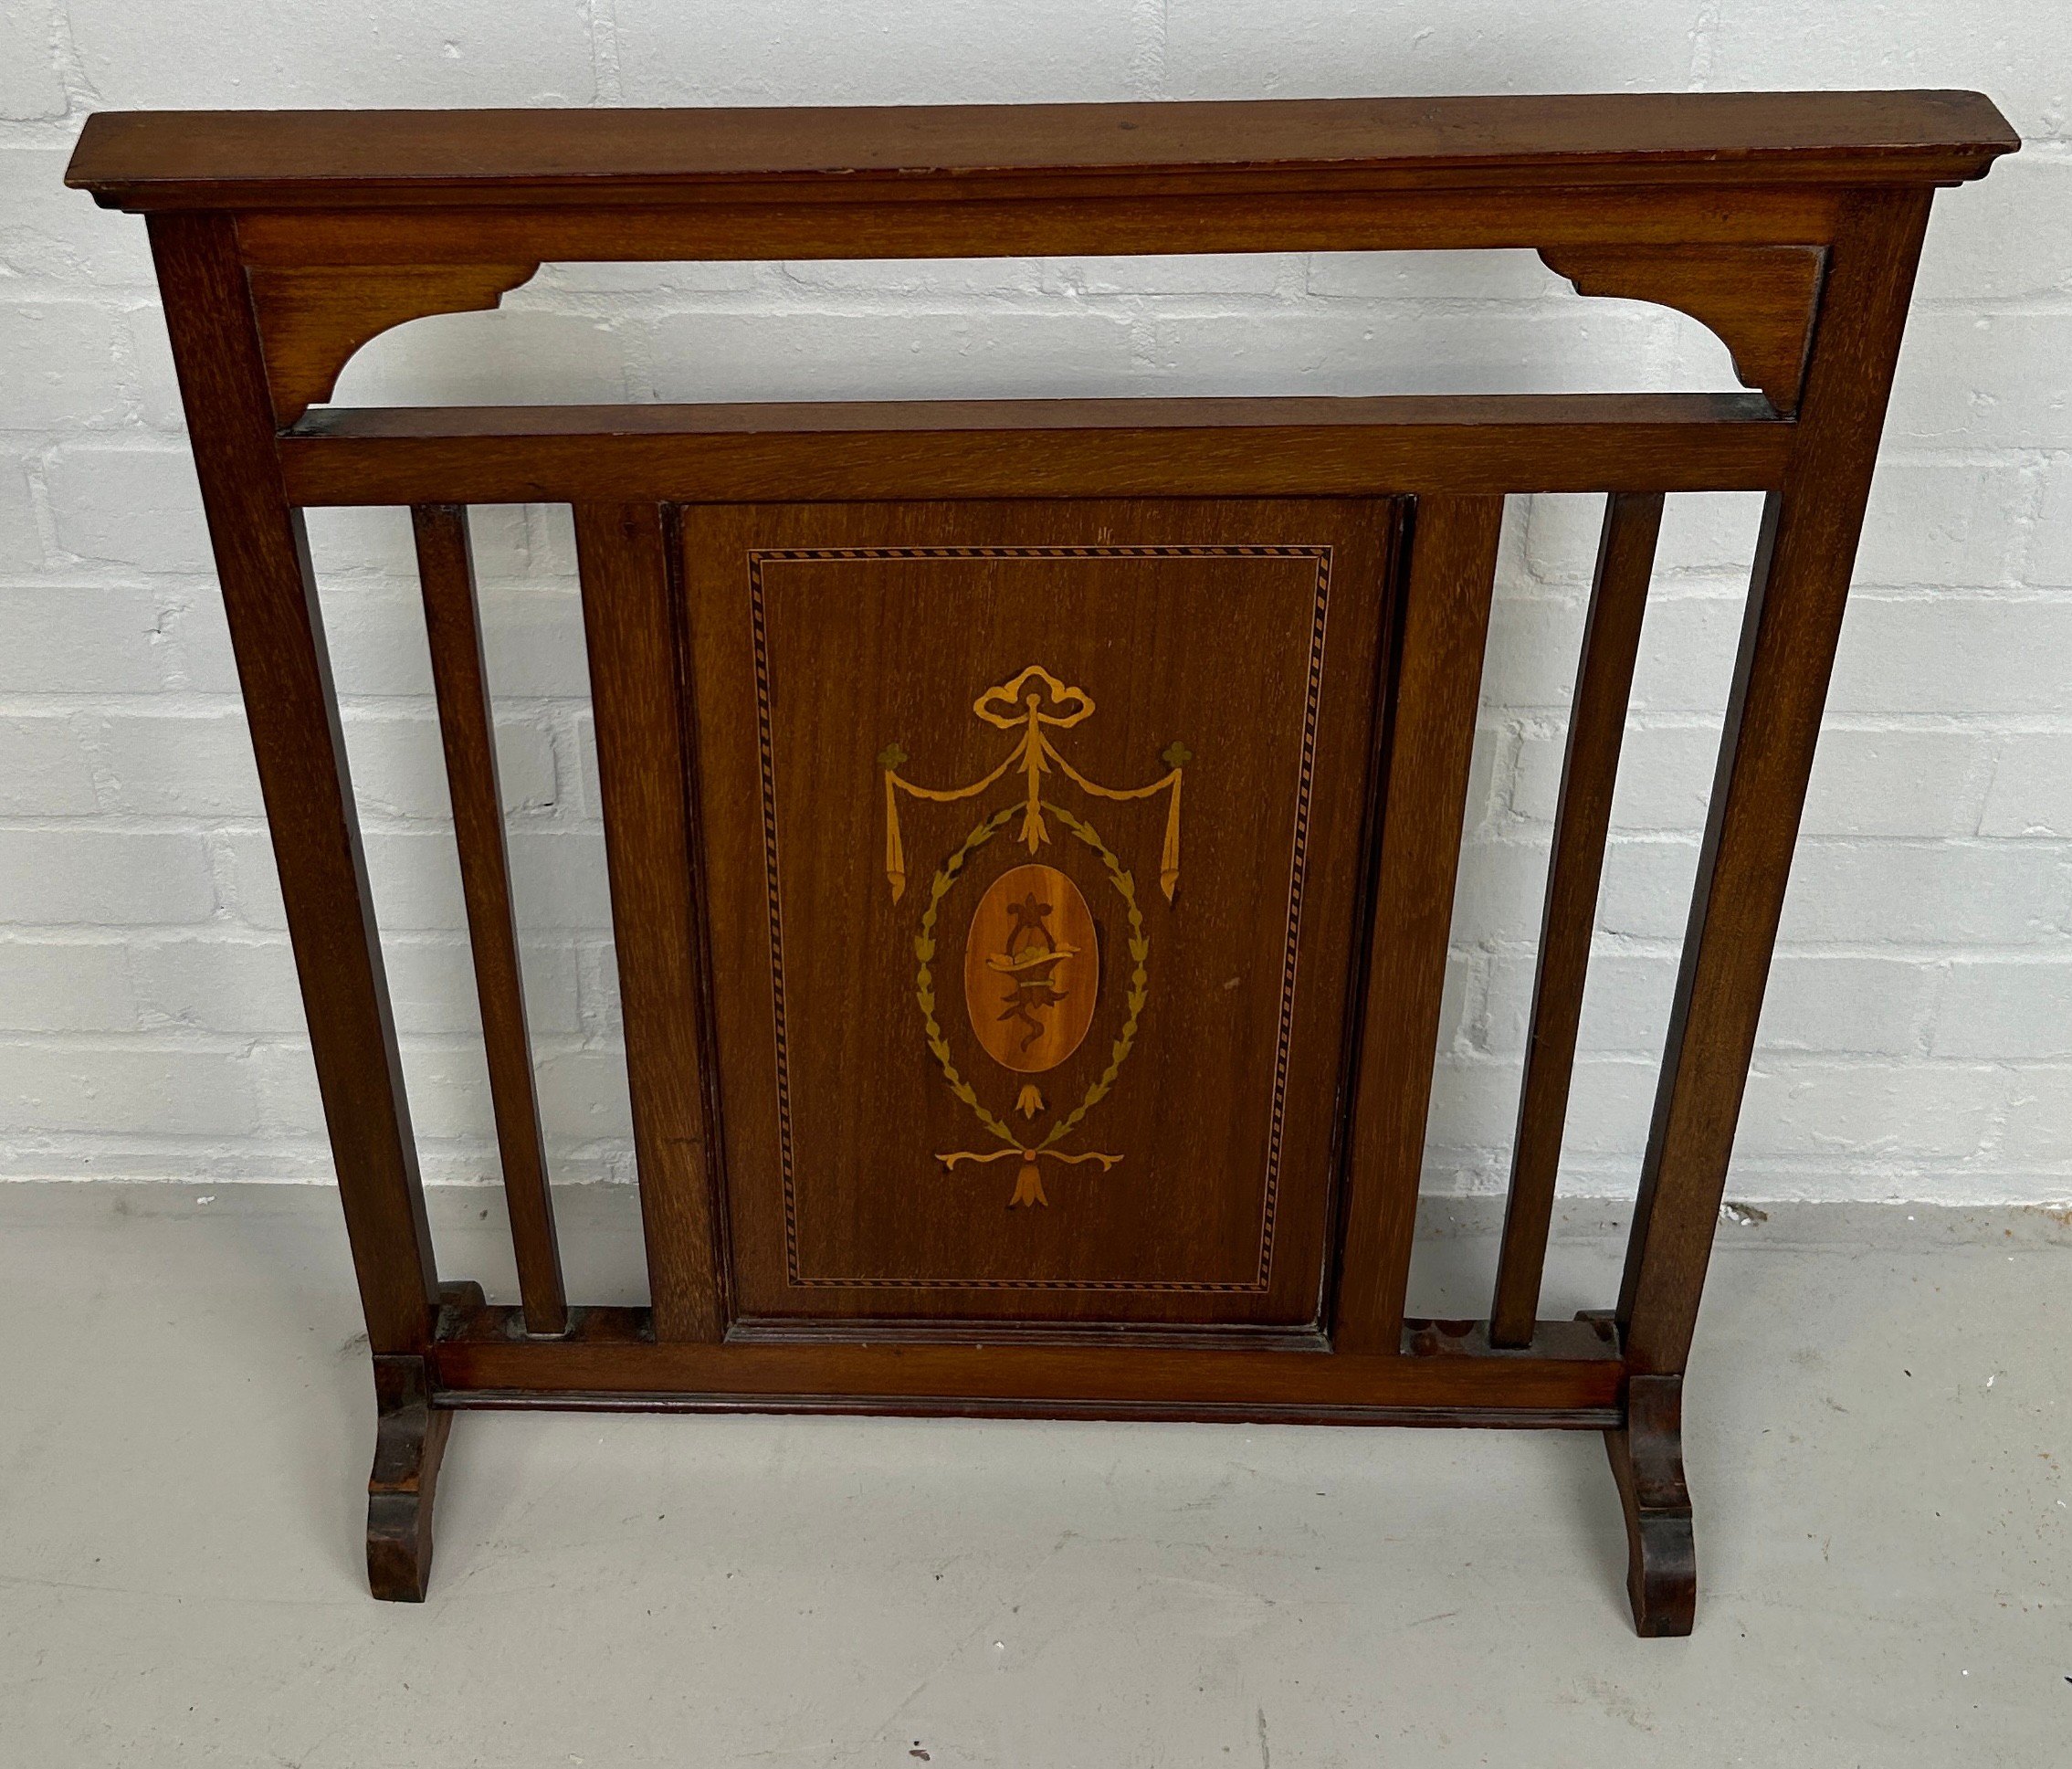 AN EDWARDIAN FIRE SCREEN WITH MARQUETRY INLAID DESIGN 72cm x 61cm x 17cm - Image 2 of 3